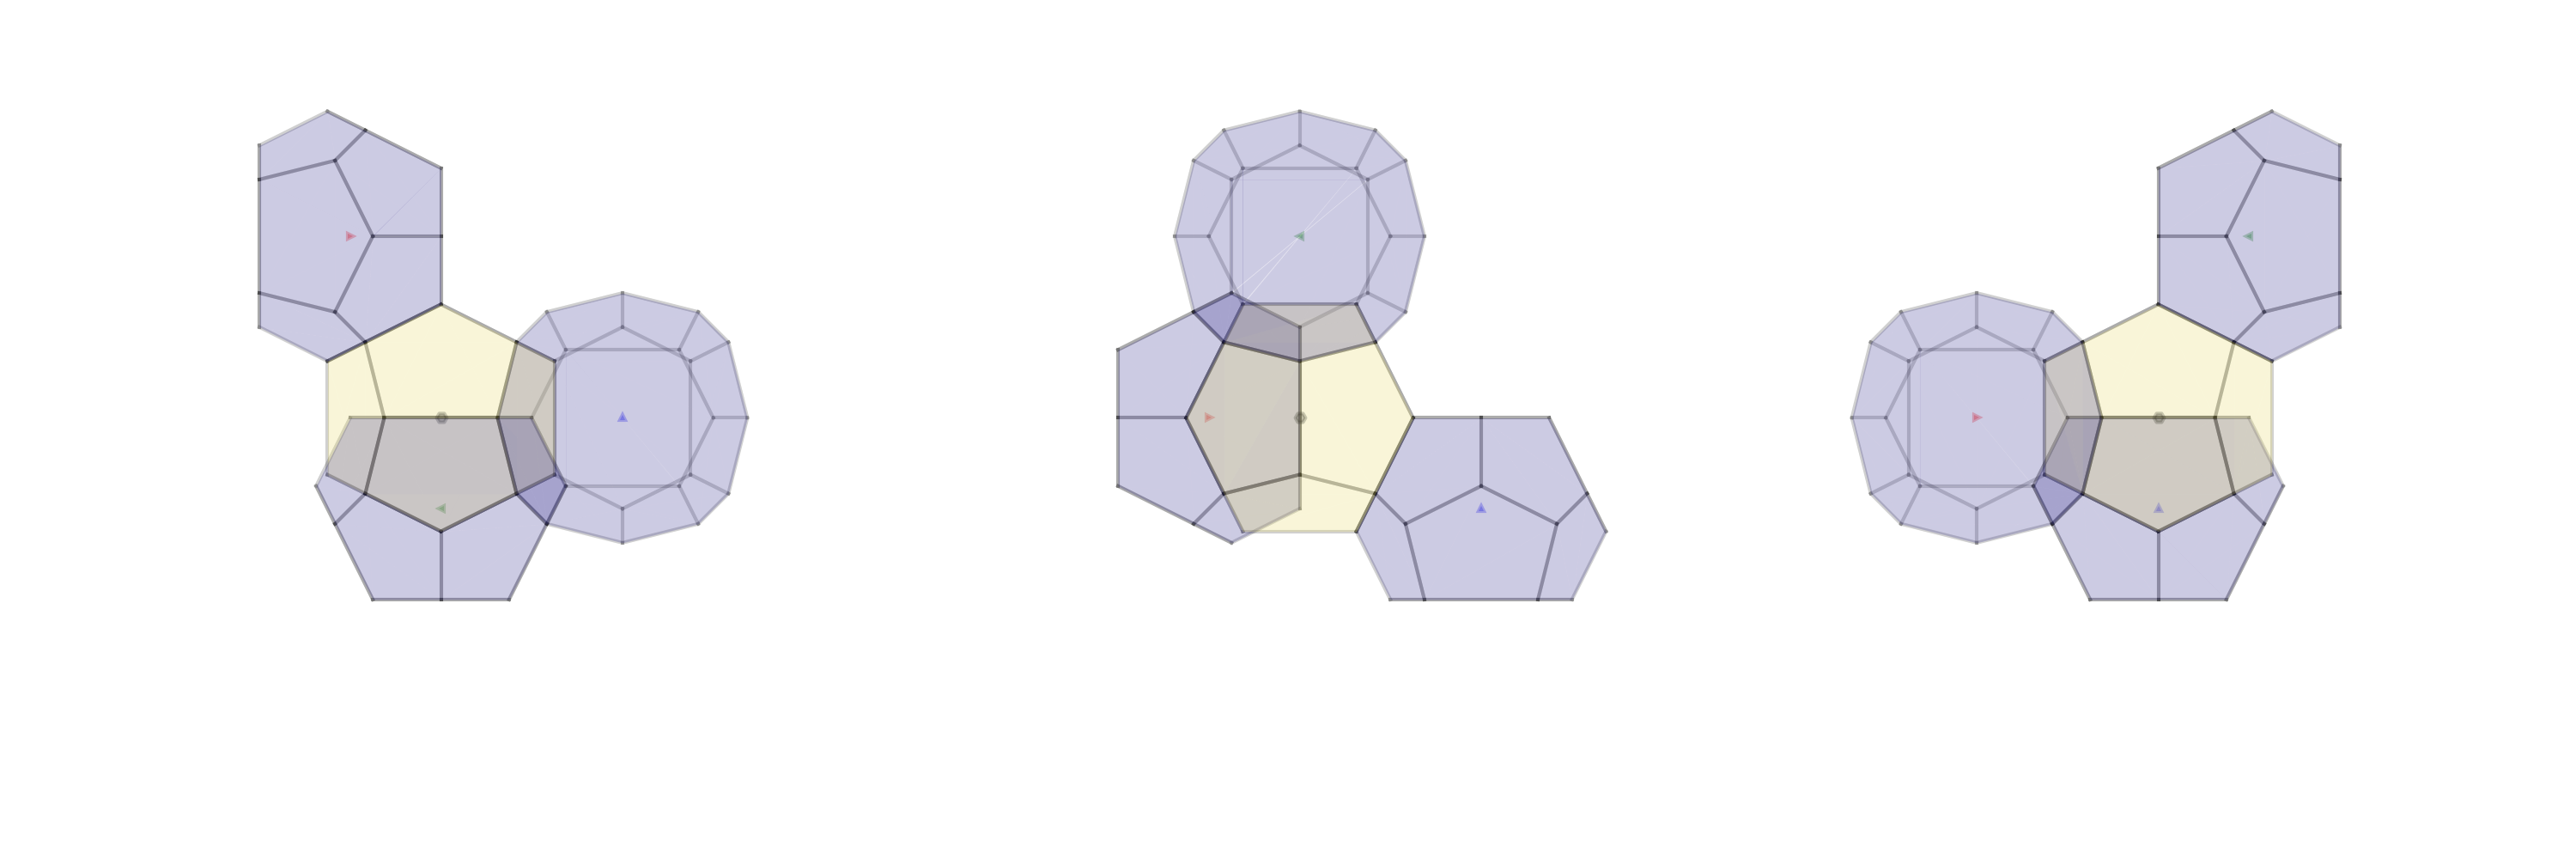 Left-handed ½ unit cell